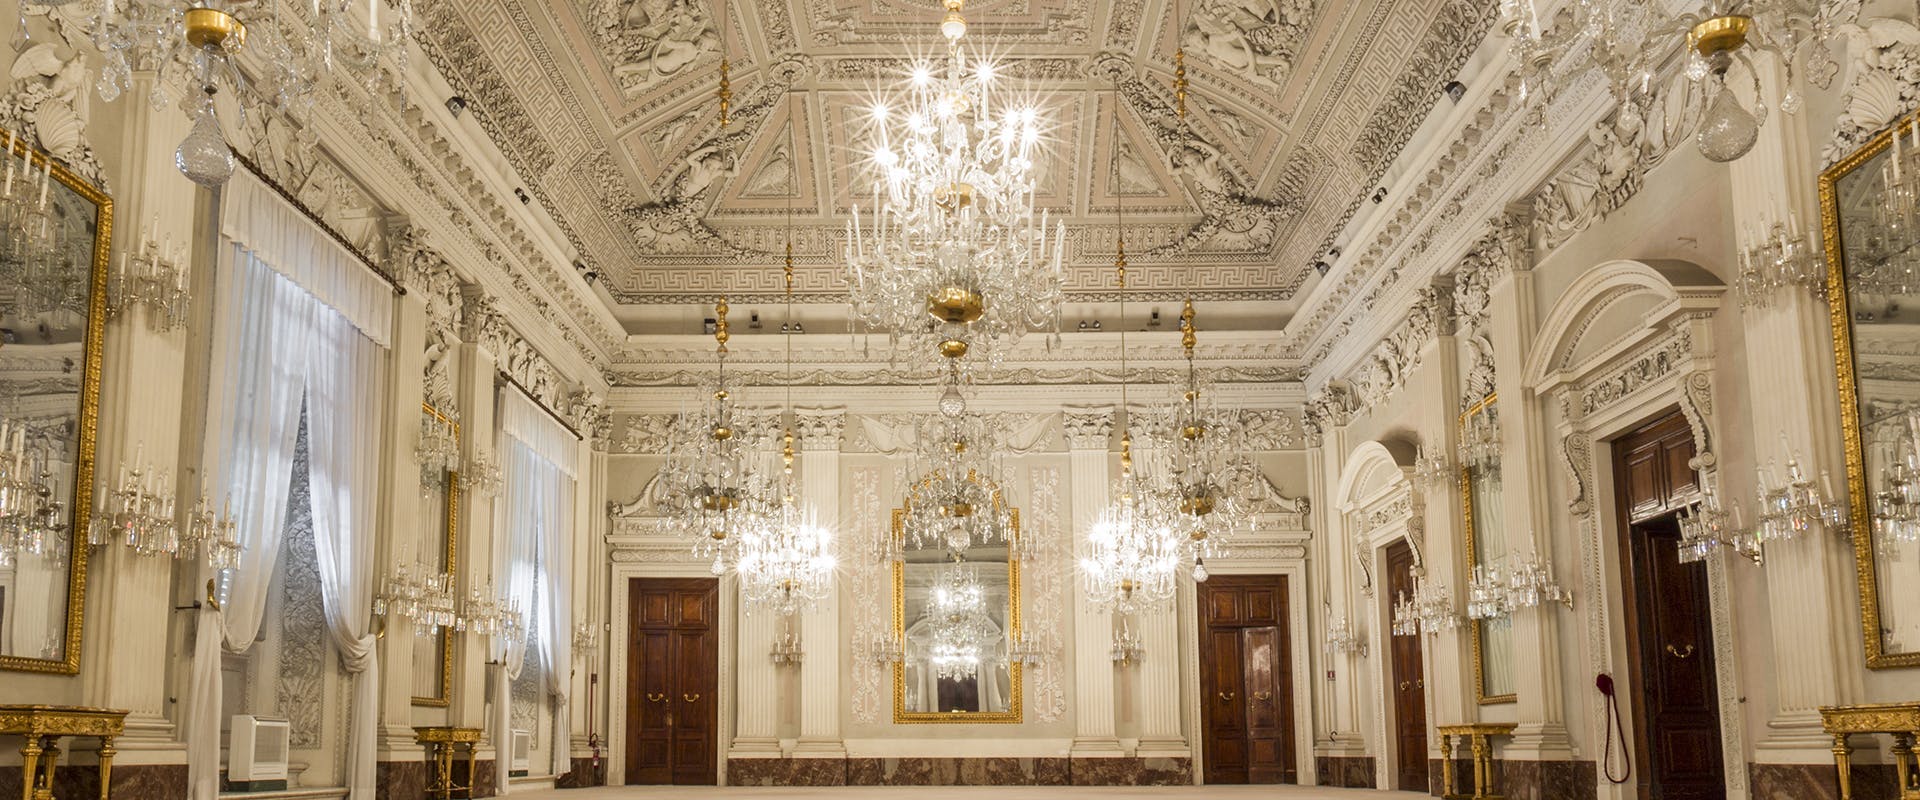 Maggio Musicale Fiorentino presents the second date with the Cycle Mozart in the White Room of Palazzo Pitti